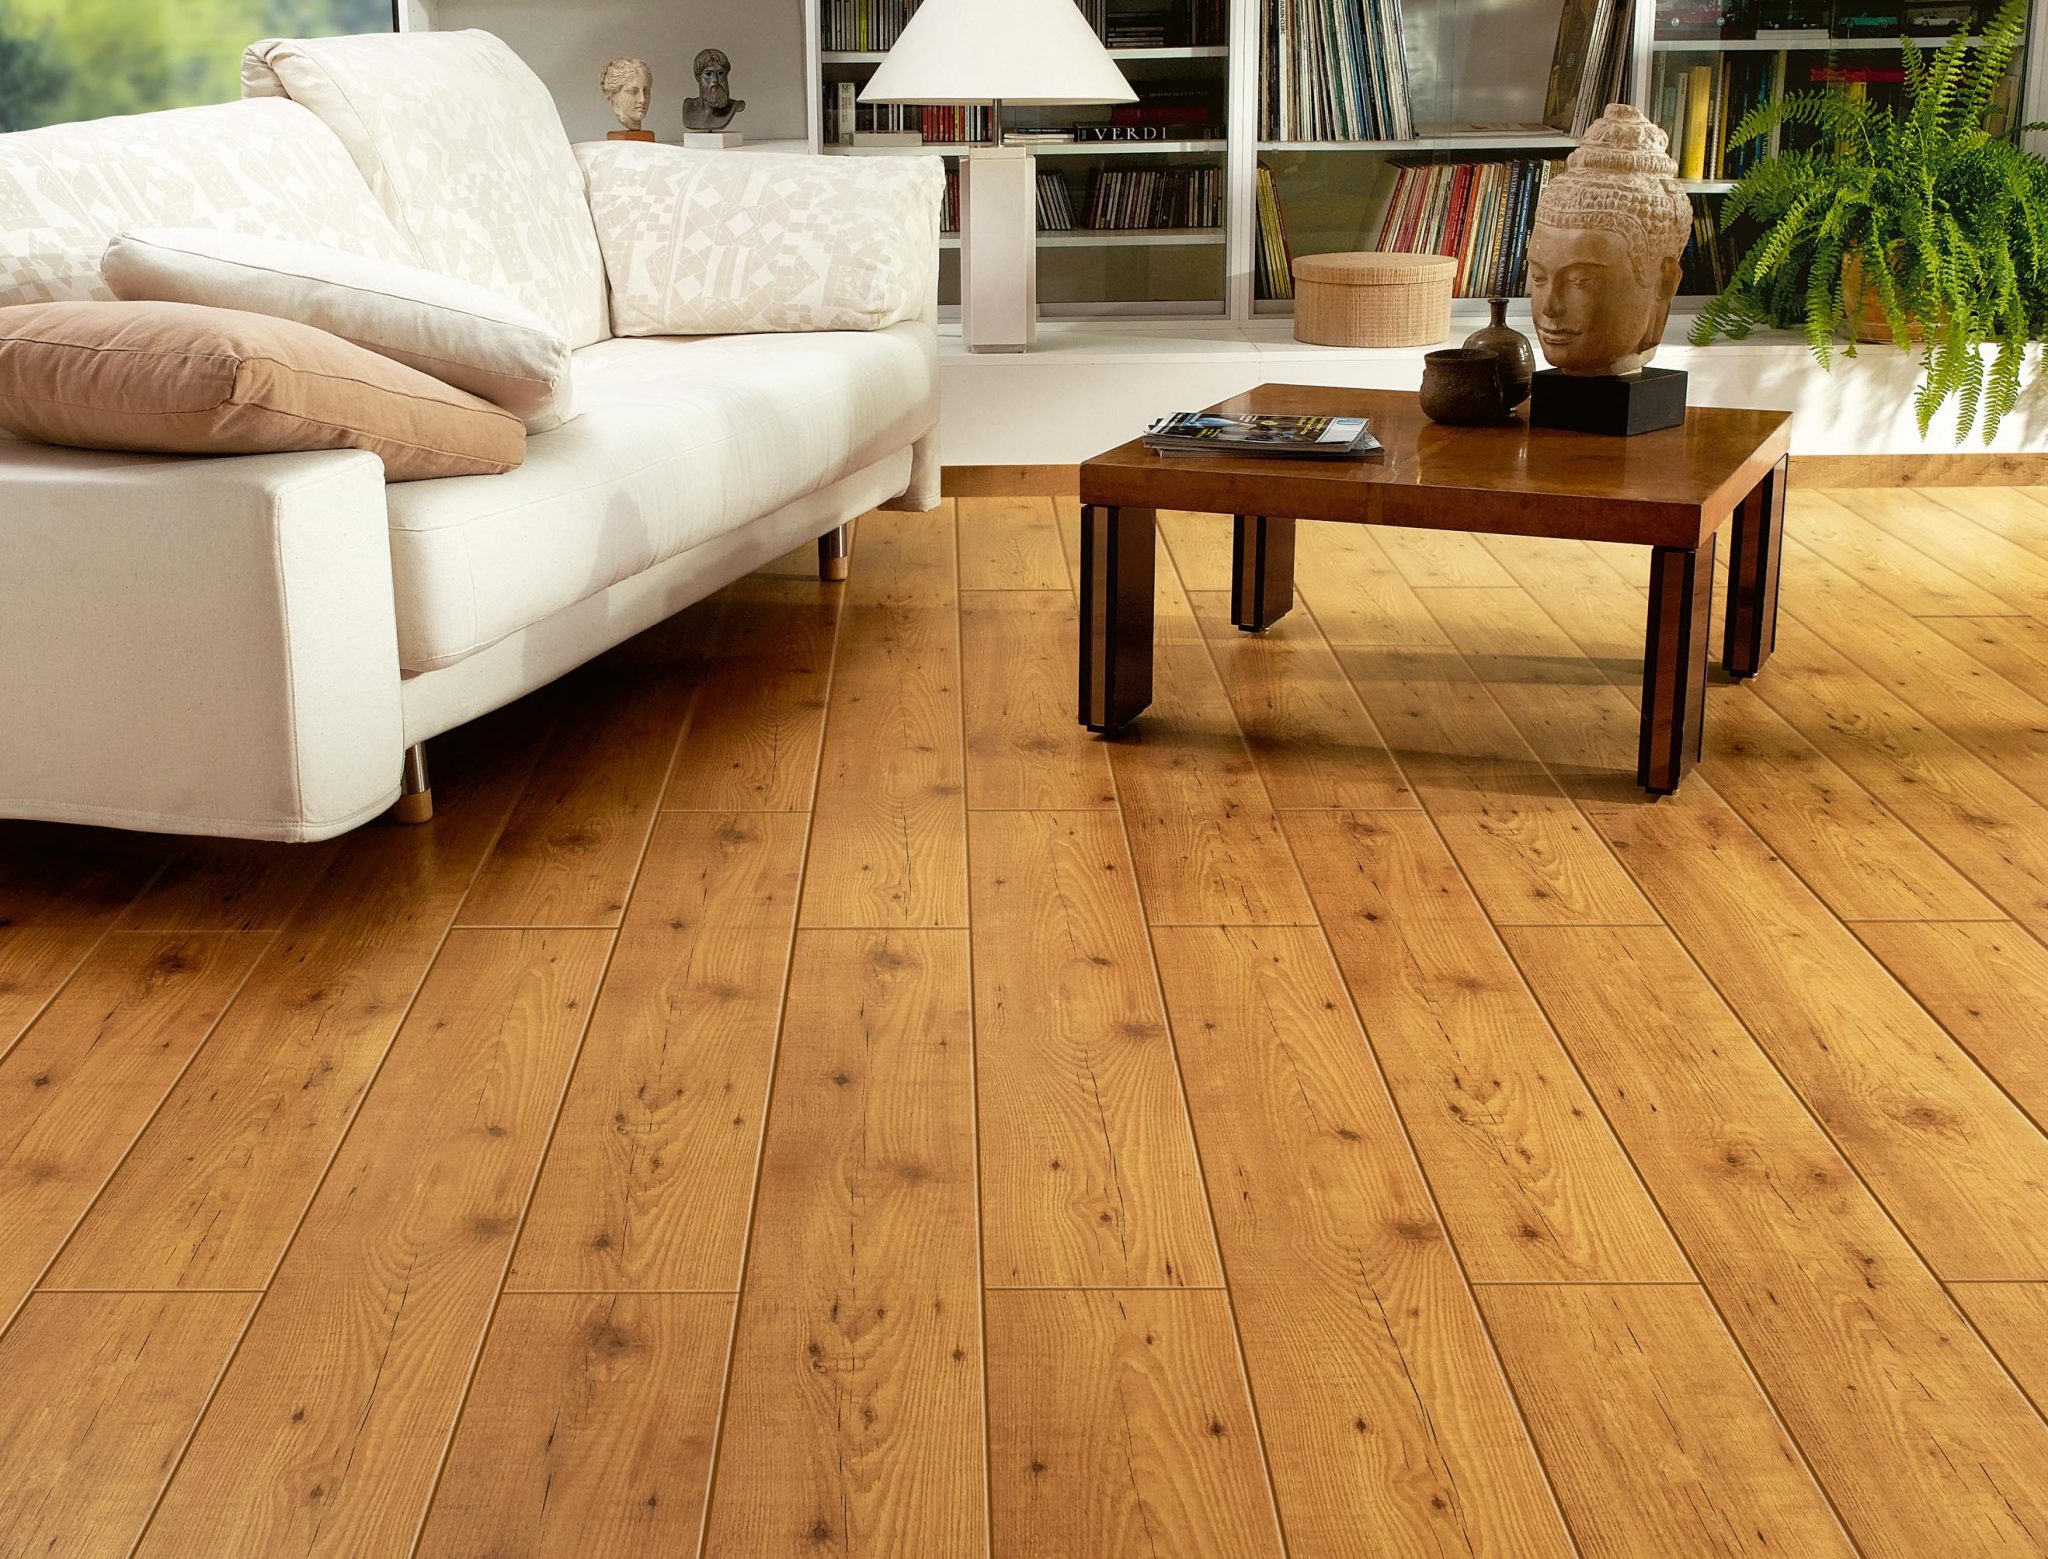 Get Best quotes fro Wooden Flooring from verified suppliers India